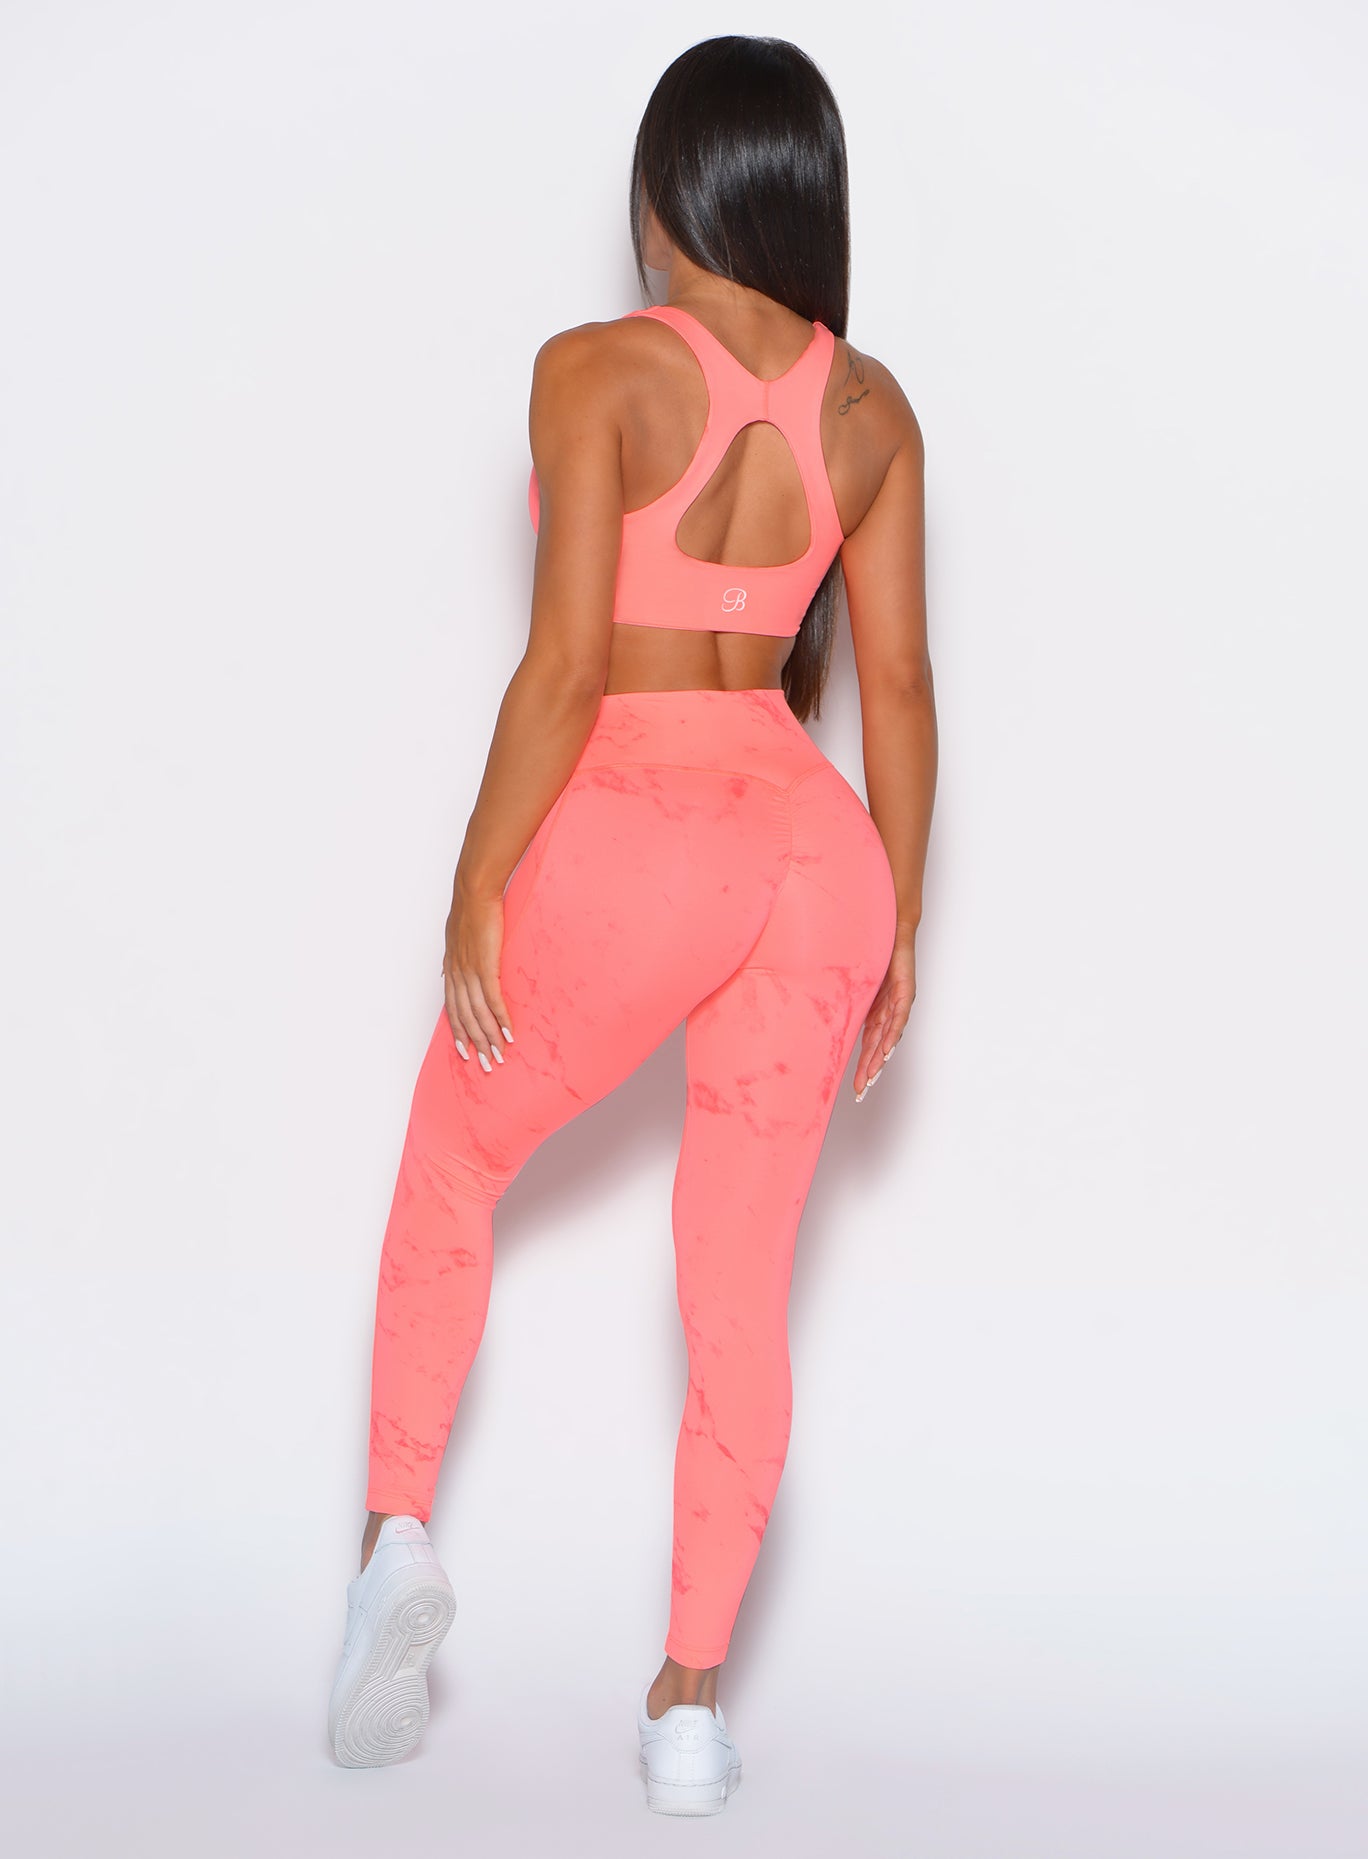 back profile view of a model wearing our fit marble leggings in Coral reef color along with a matching bra